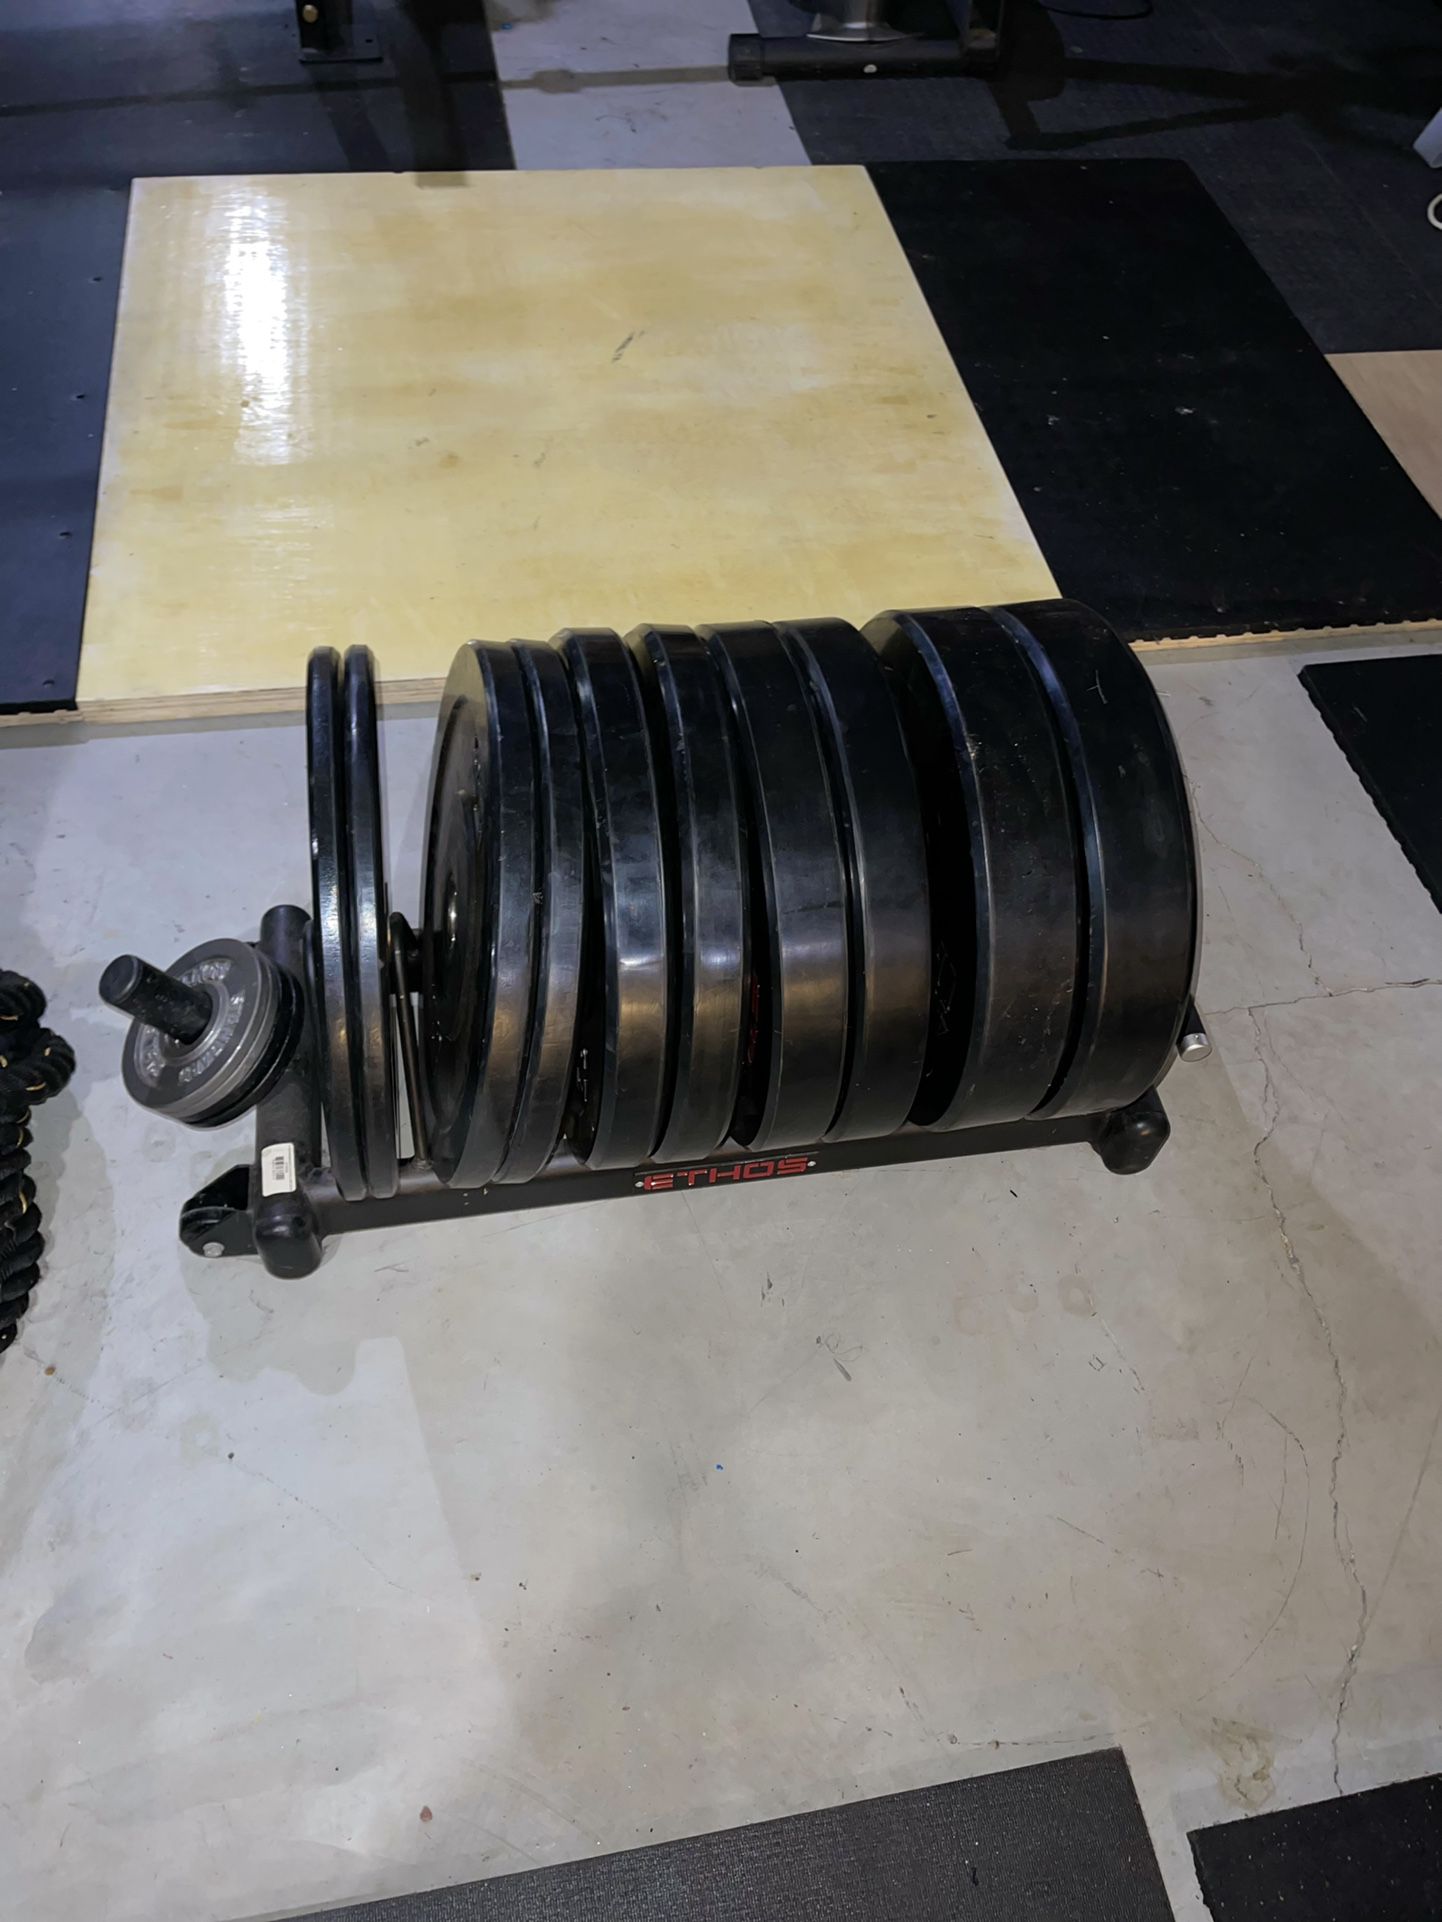 Bumper Weight Plates With Rack